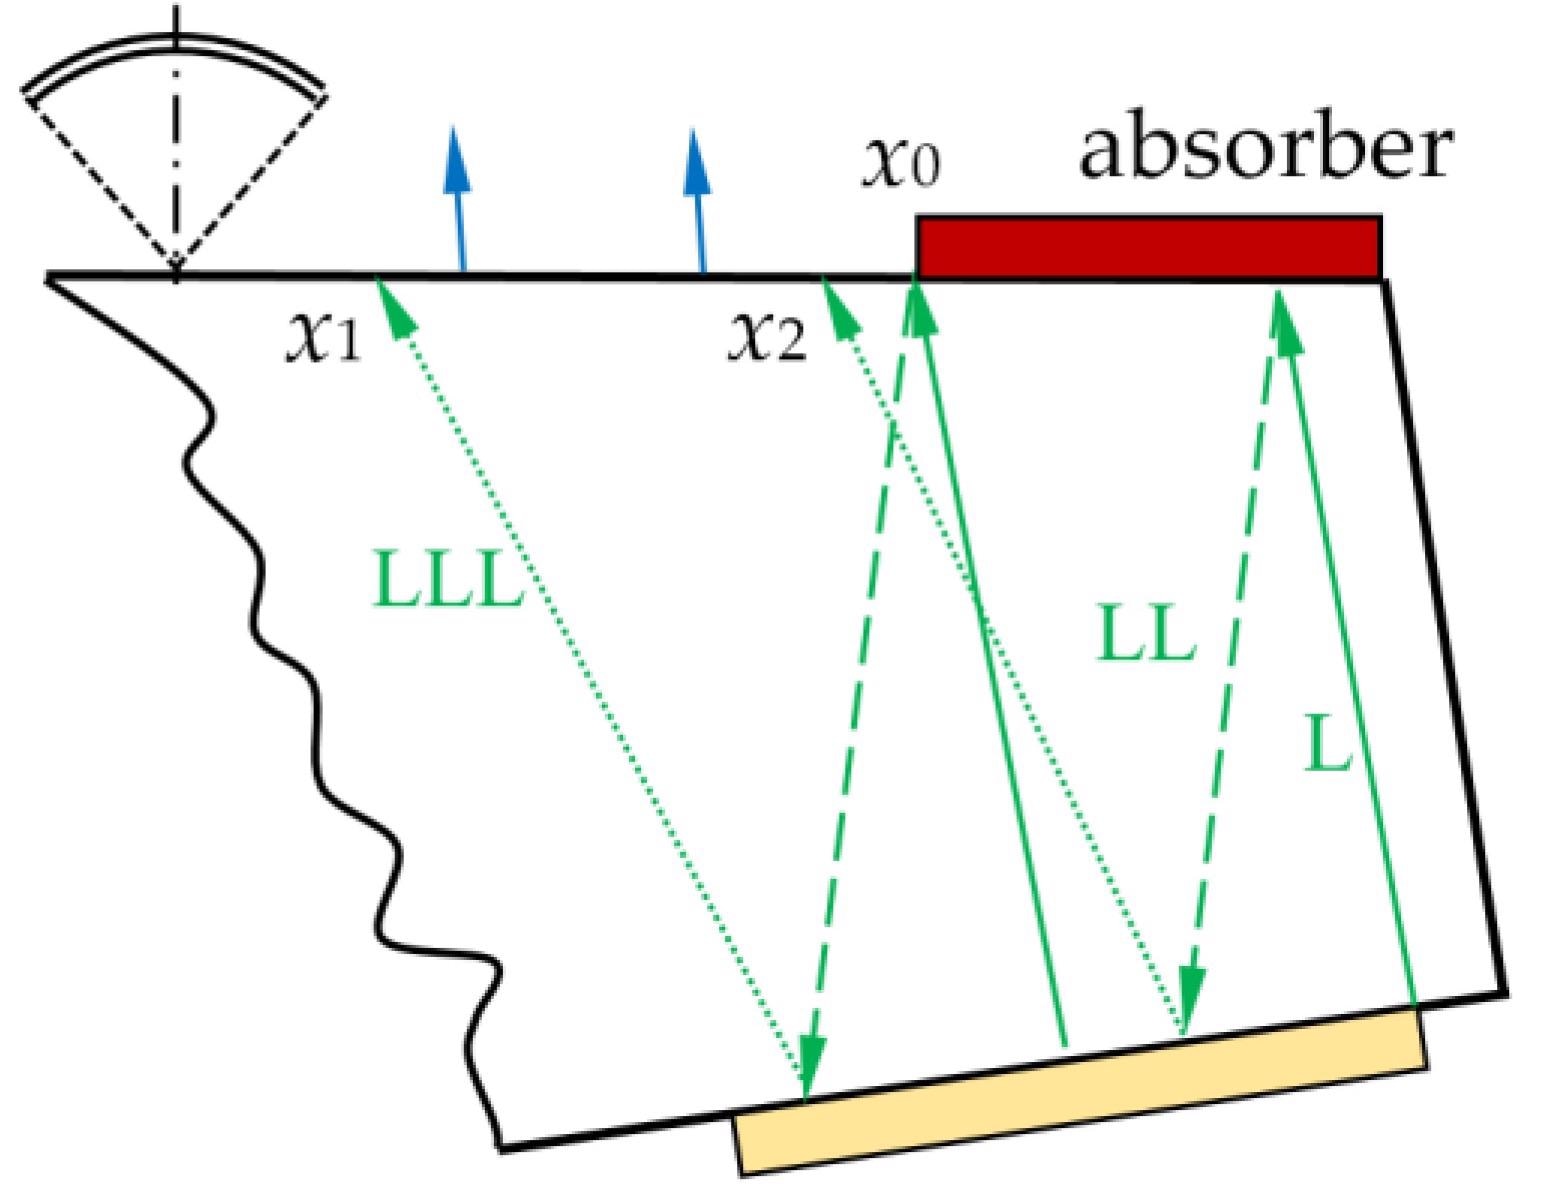 Ray propagation in AO cell with absorber.